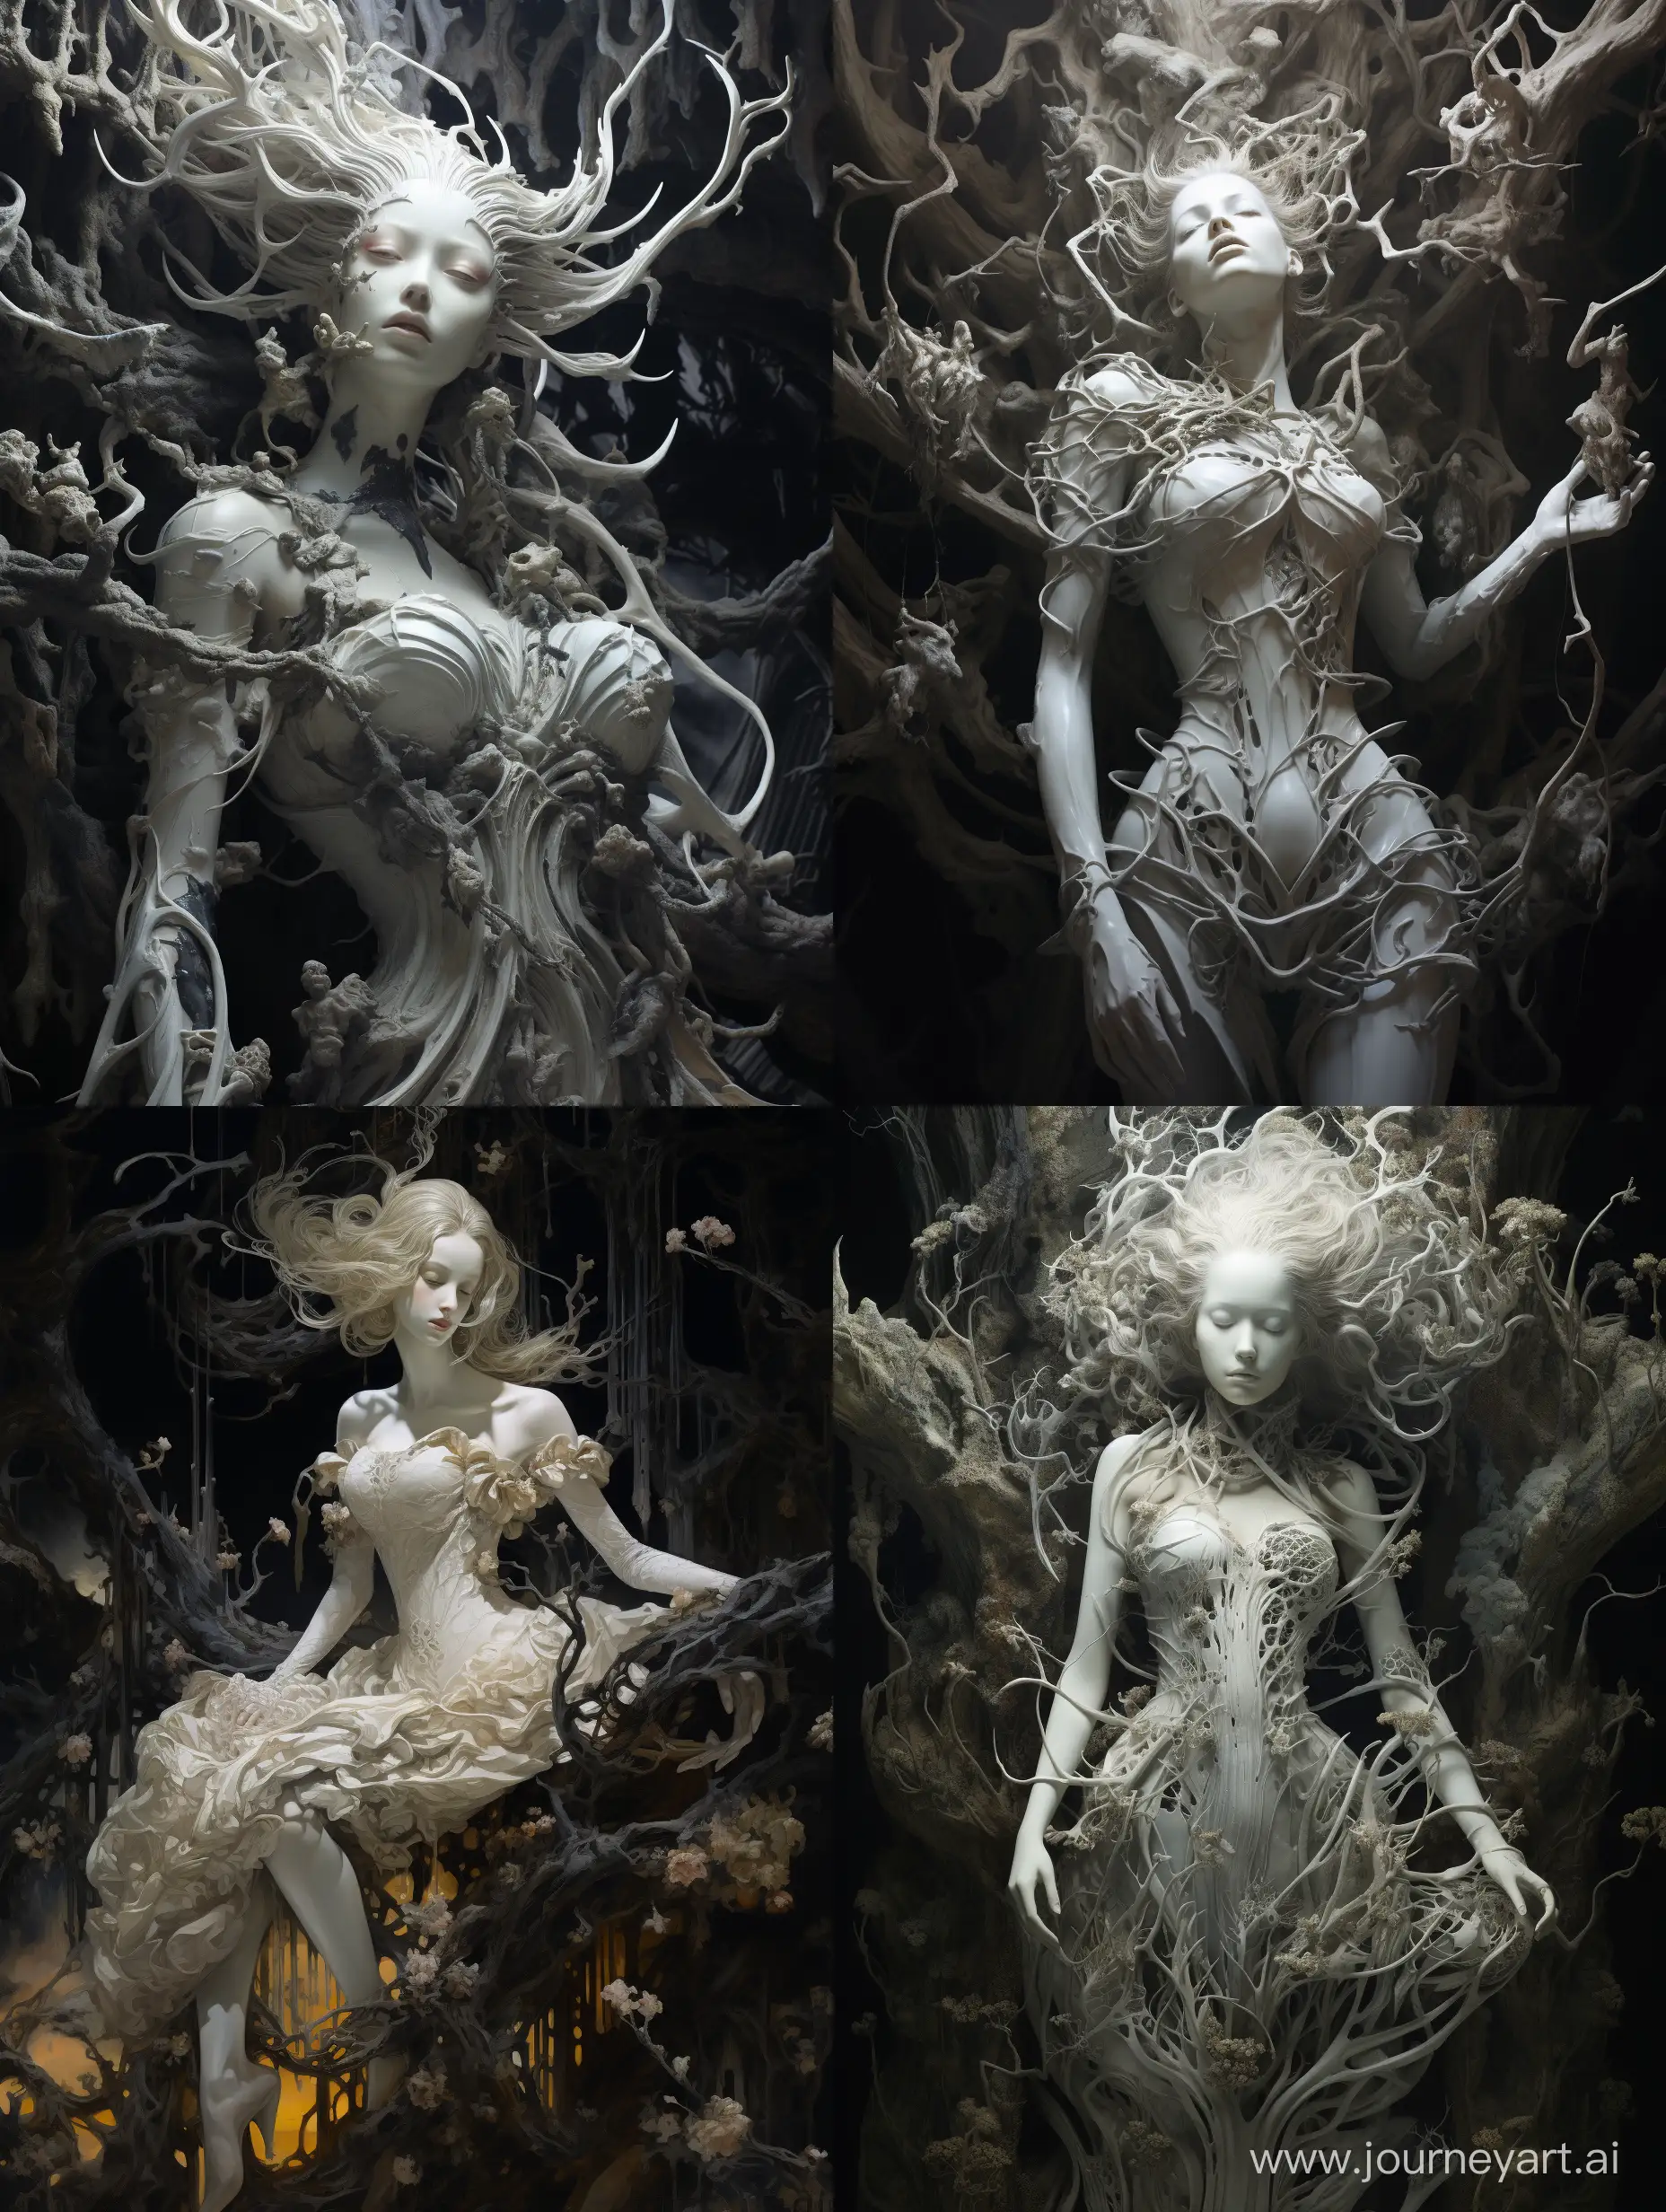 Spectral-Woman-Amidst-Haunted-Forest-and-Suspended-Dolls